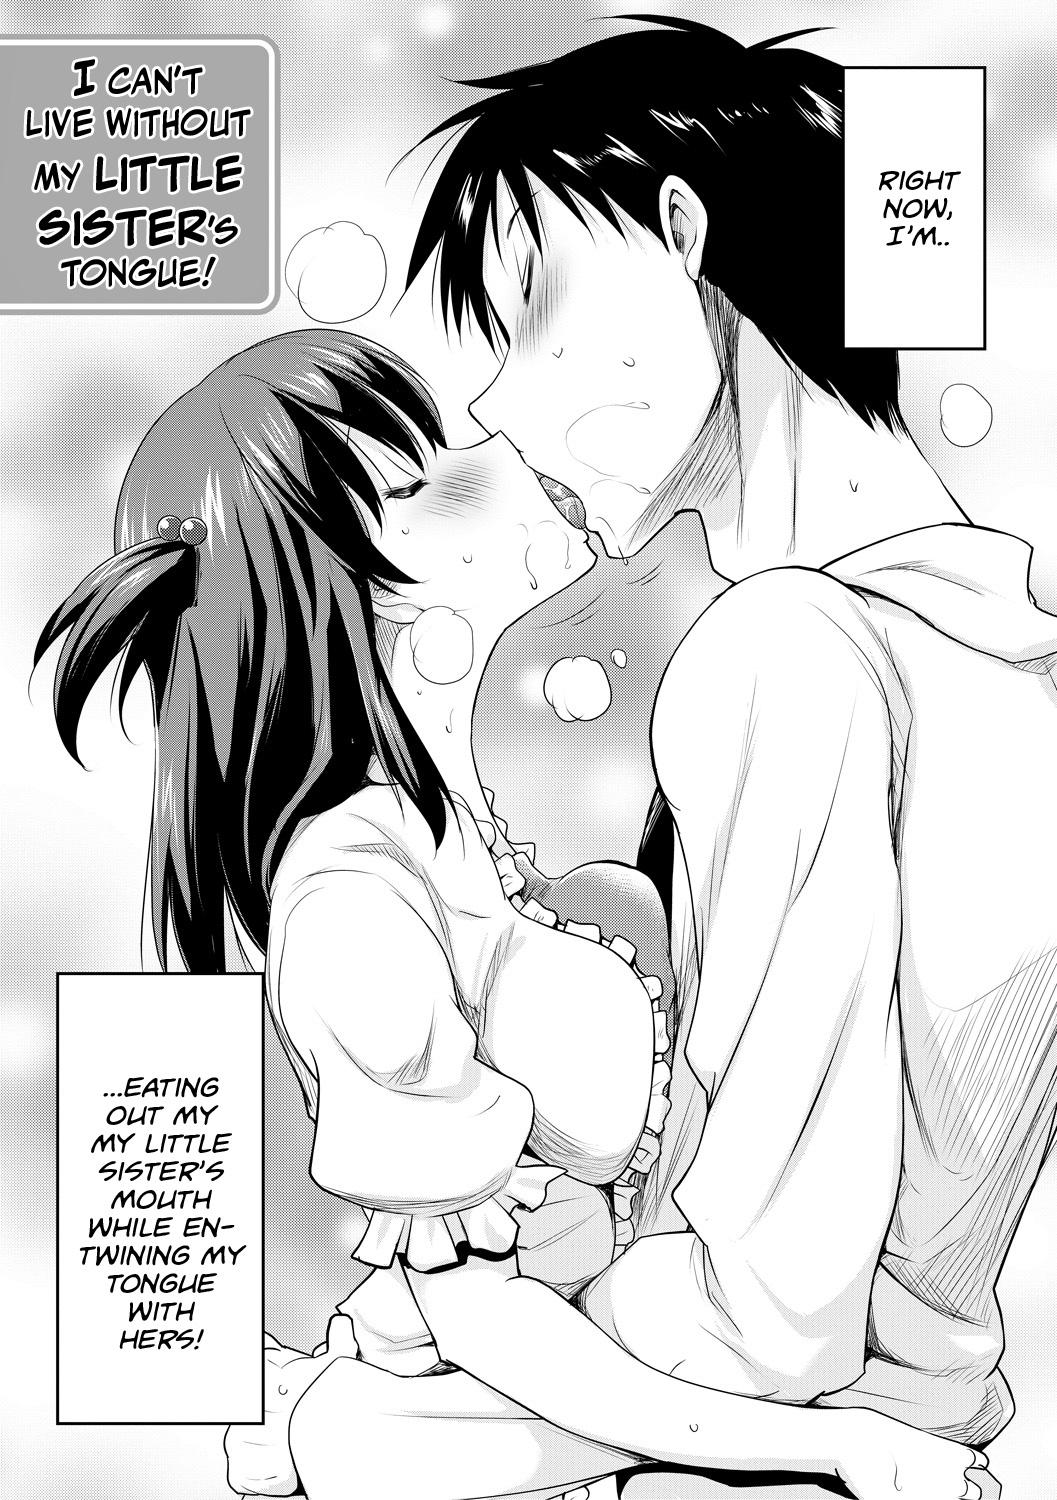 [Pony-R] I Can't Live Without My Little Sister's Tongue Chapter 01-02 + Secret Baby-making Sex with a Big-titted Mother and Daughter! (Kyonyuu Oyako no Shita to Shikyuu ni Renzoku Shasei) [English] [Team Rabu2] [Digital] 3